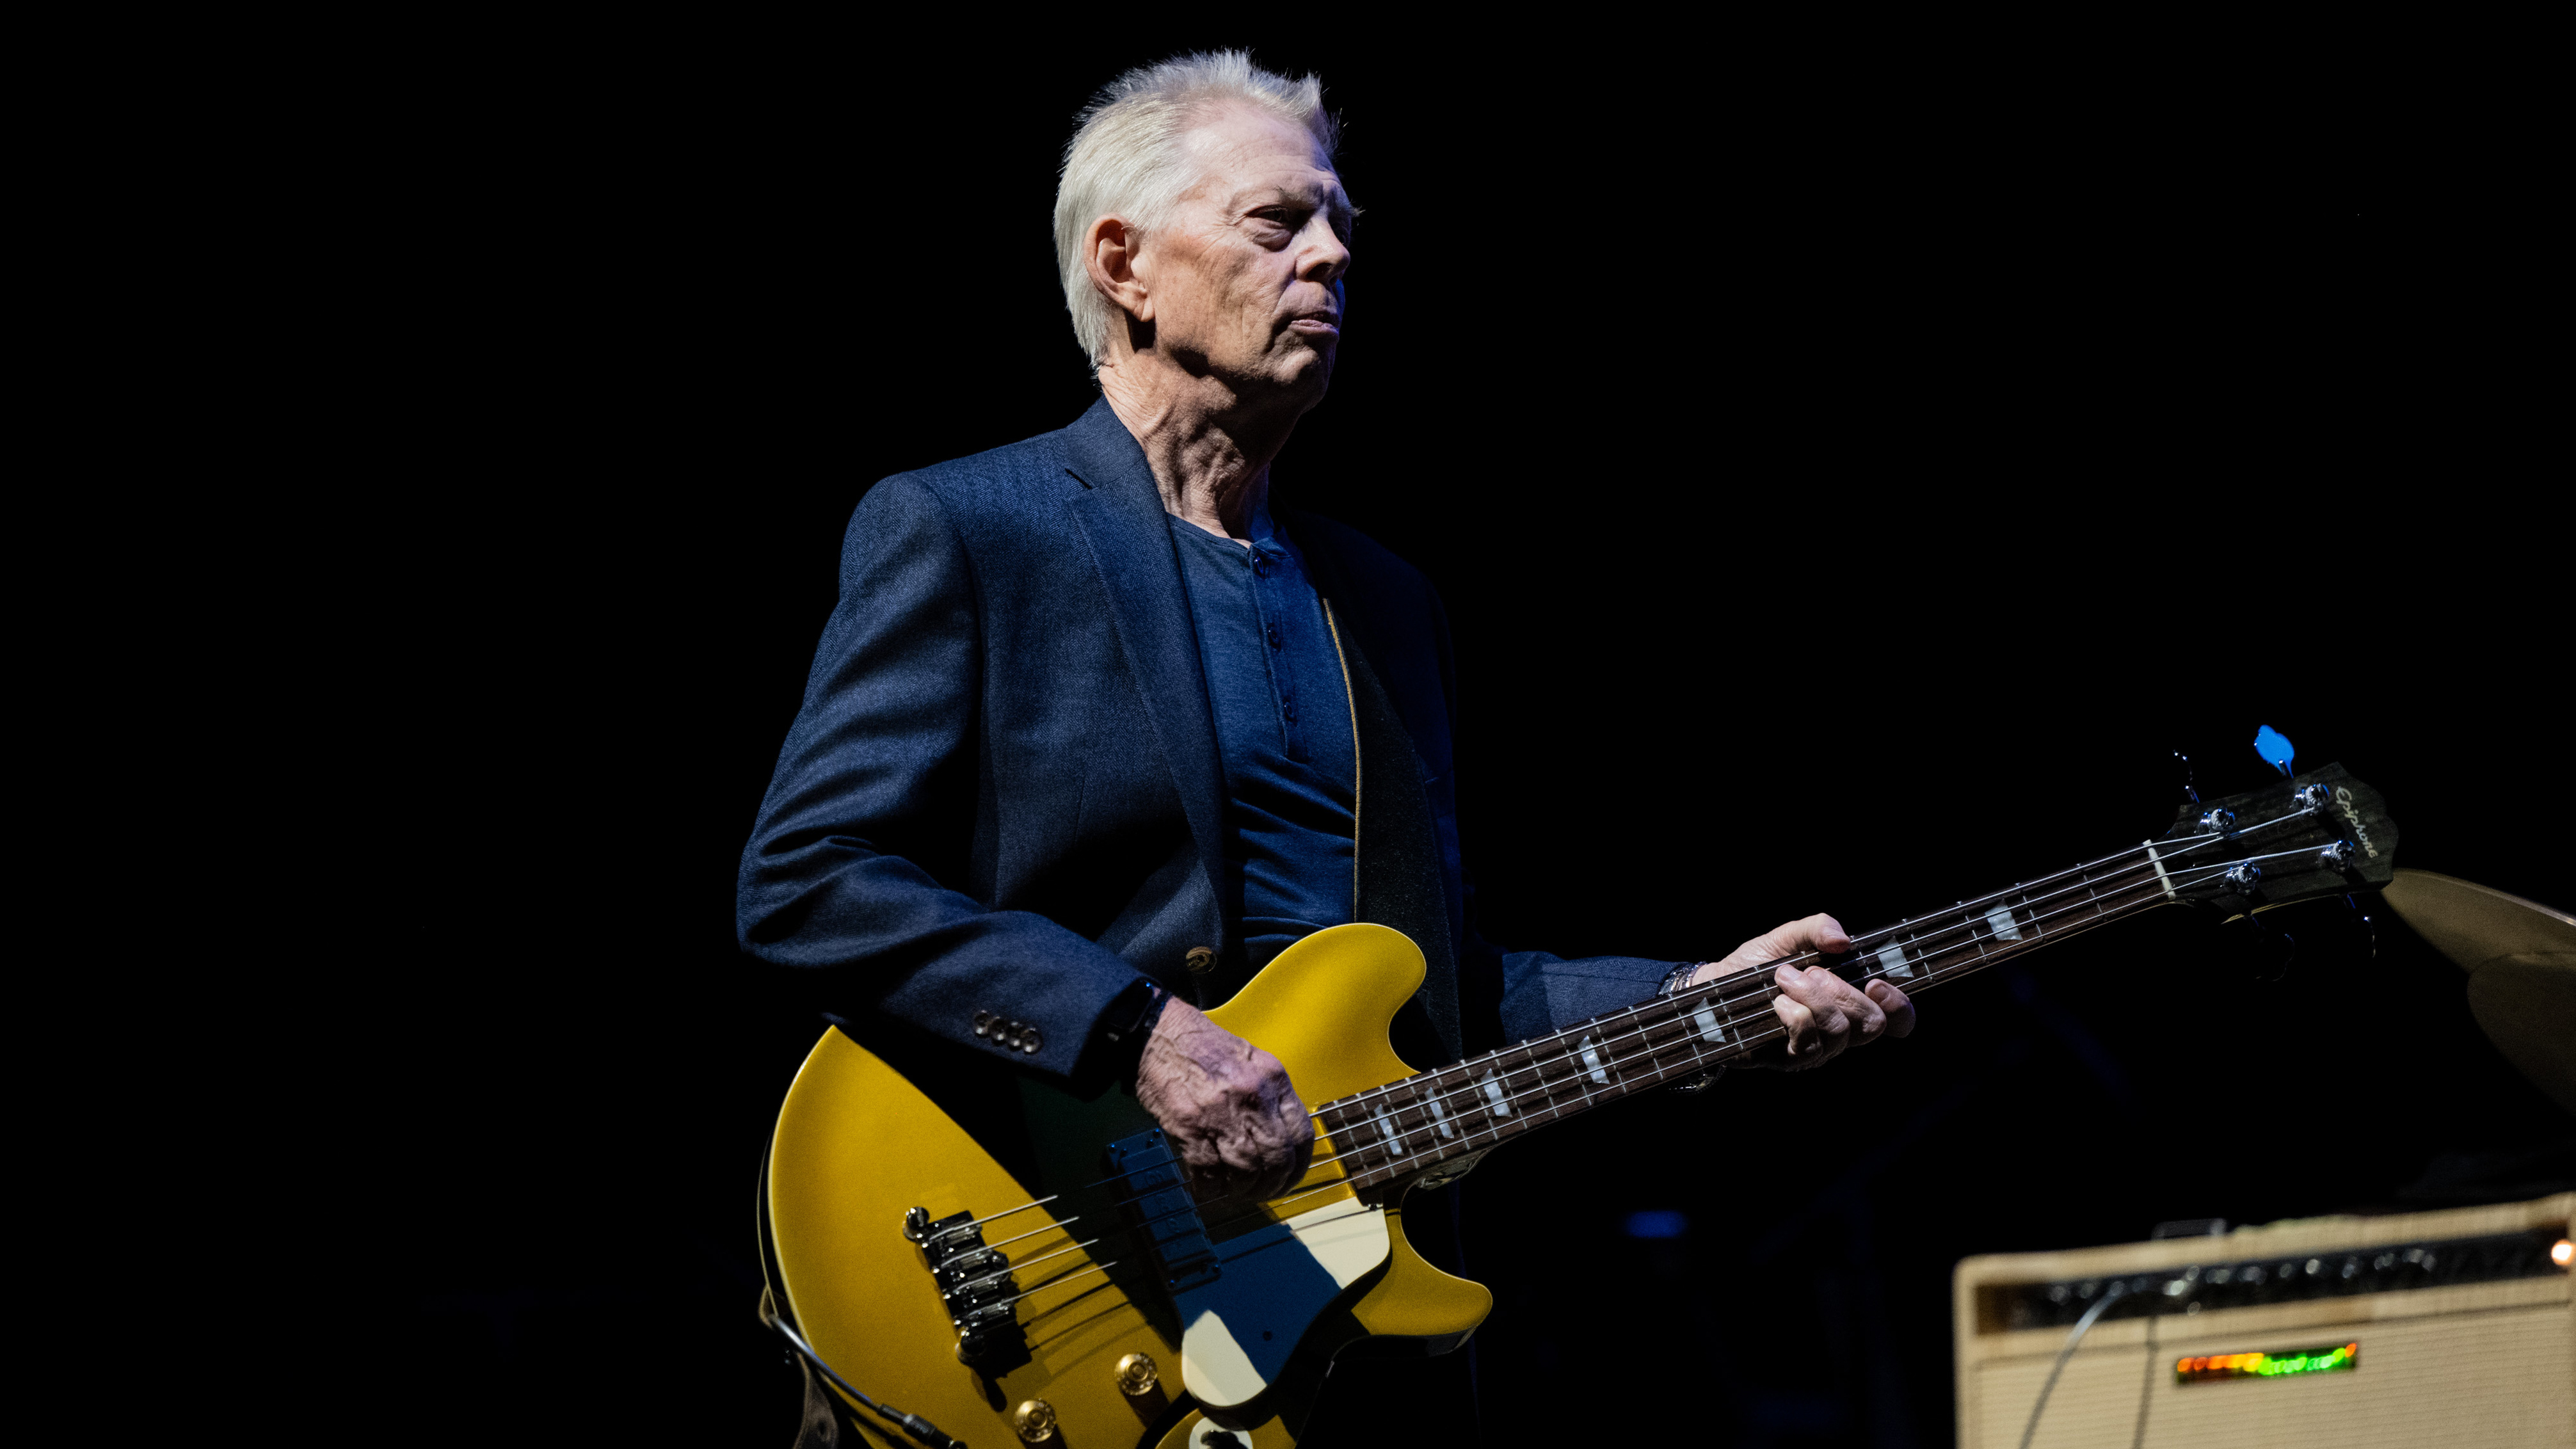 Jefferson Airplane's Jack Casady on why he plays hollowbody basses, road-testing his Epiphone signature models, and the most pivotal point of his playing career